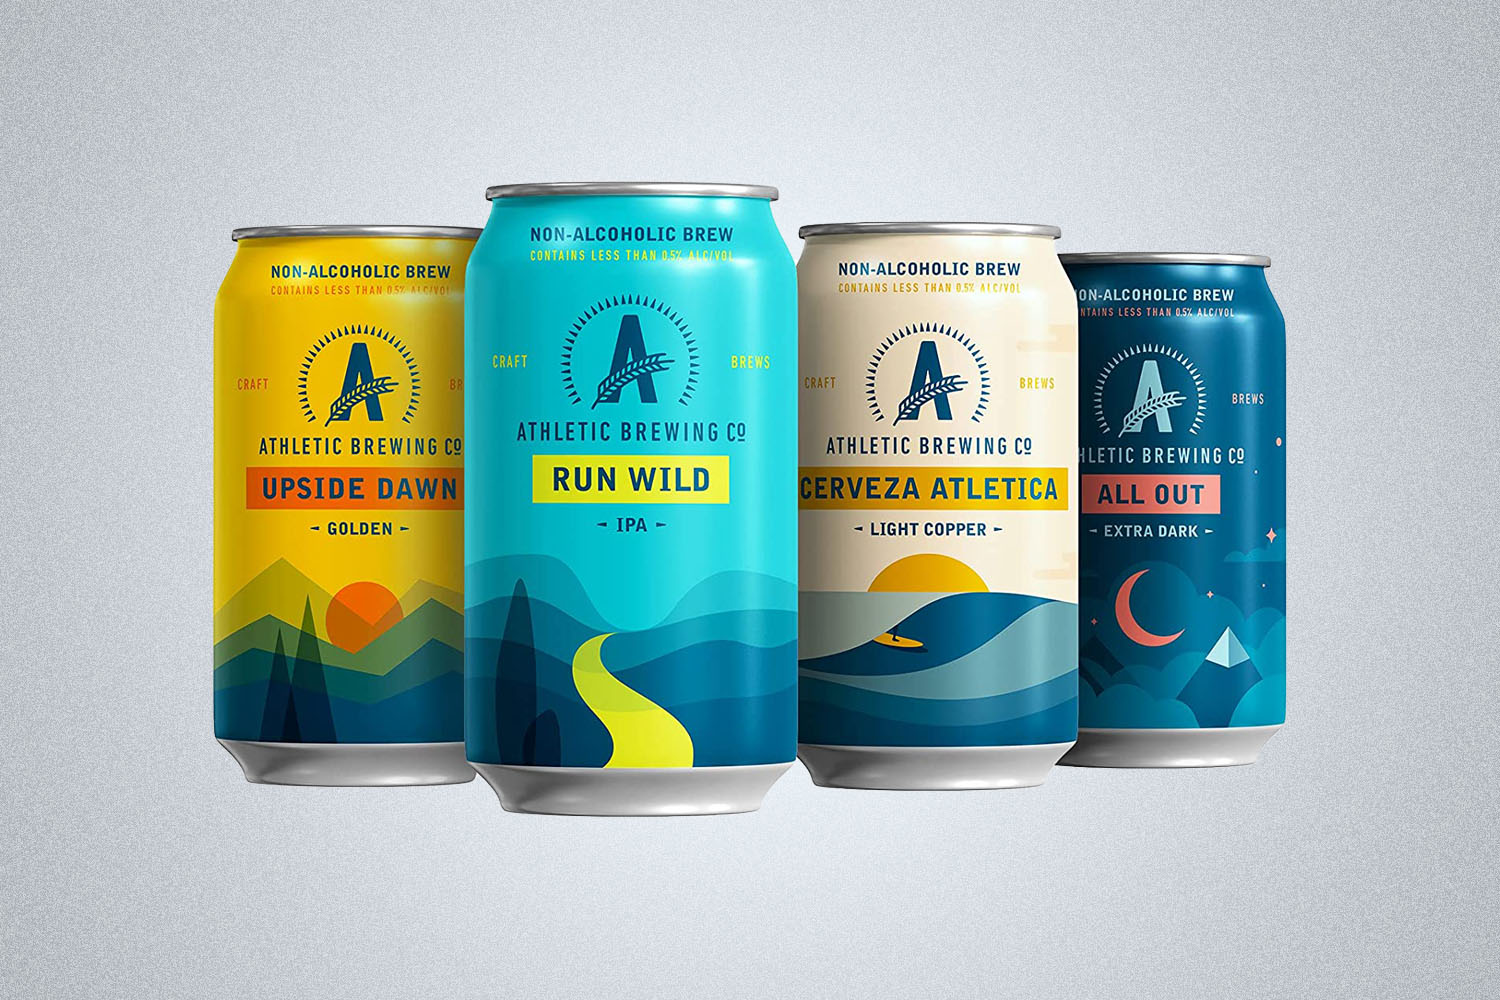 The Athletic Brewing Craft Beer in multiple flavors is a refreshing non-alcoholic beer for athletes and fitness people looking to enjoy beer without the added alcohol